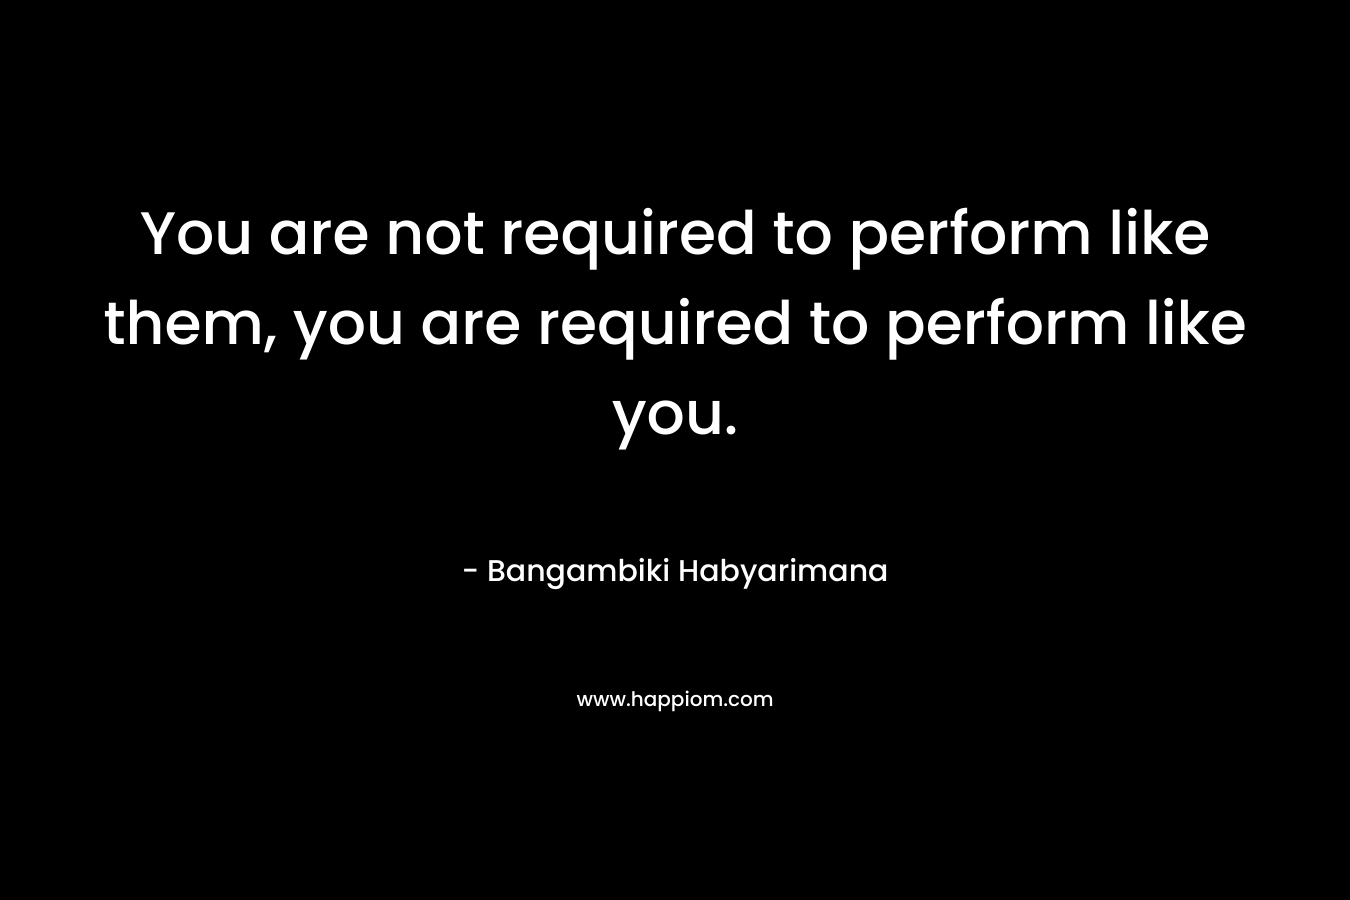 You are not required to perform like them, you are required to perform like you.